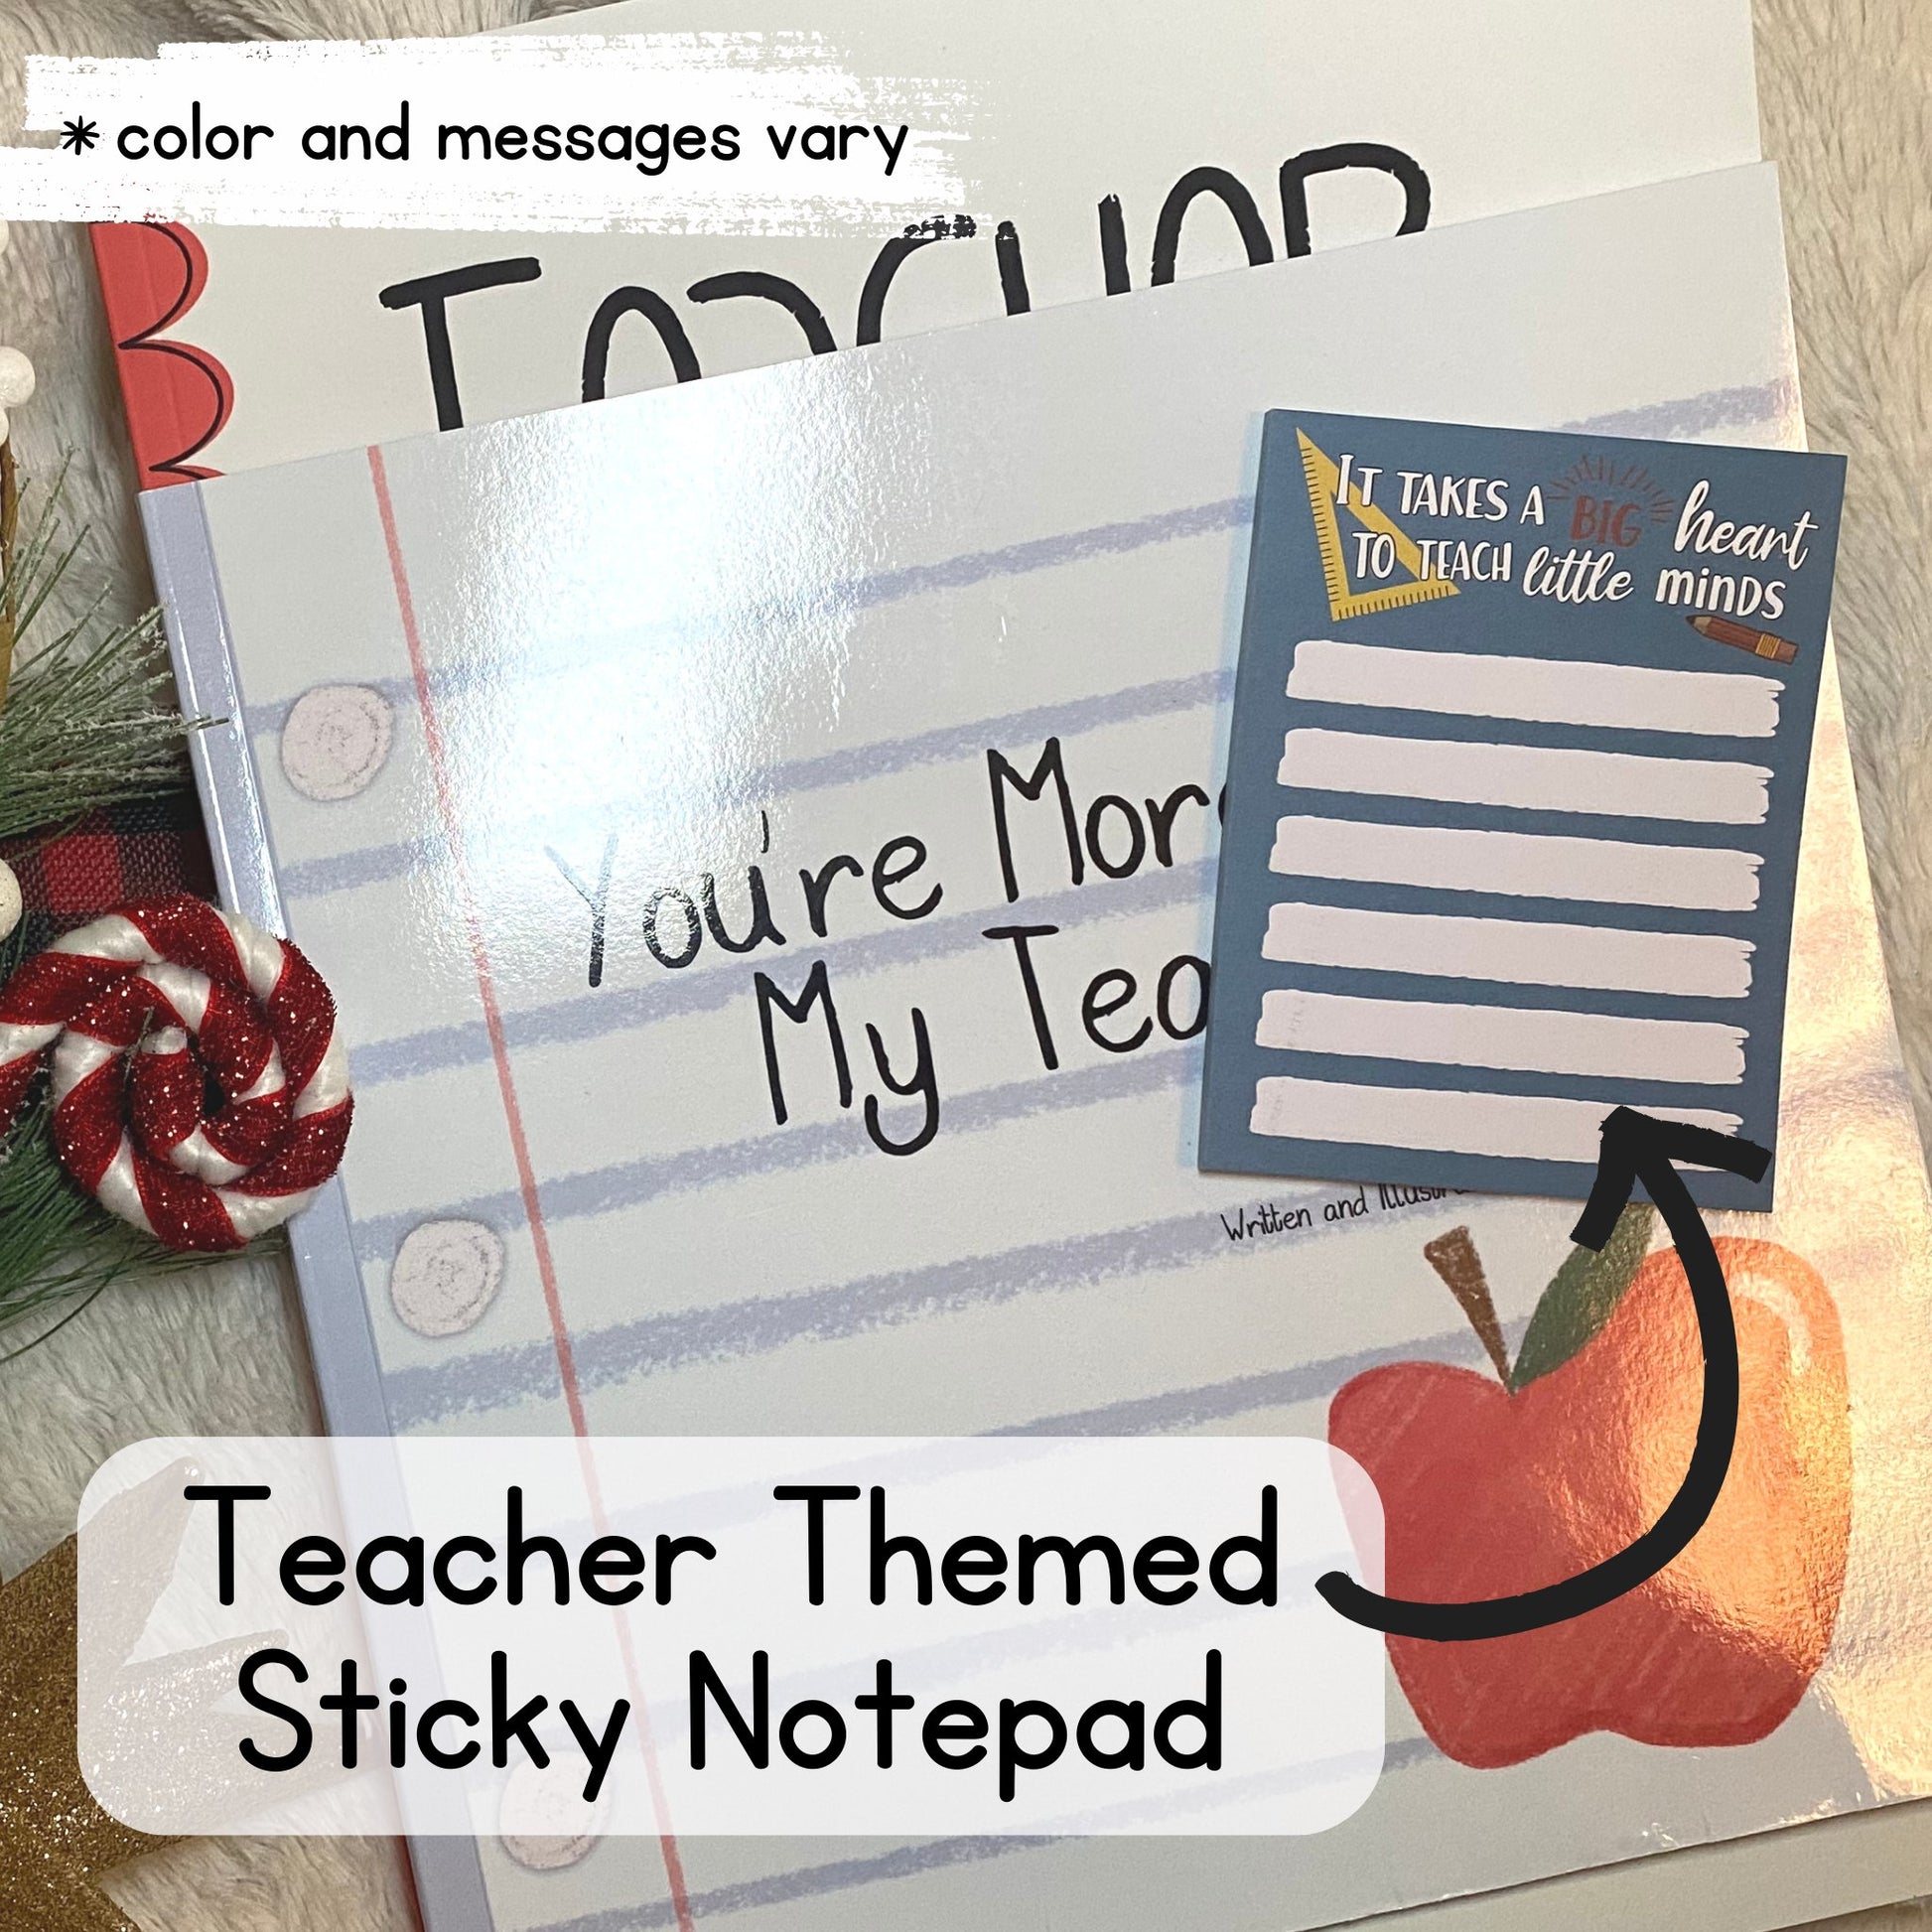 Image of the teacher themed sticky notepad included in the teacher gift set self published through Amazon KDP and Kindle Direct Publishing that includes an autographed copy of "You're More Than My Teacher."